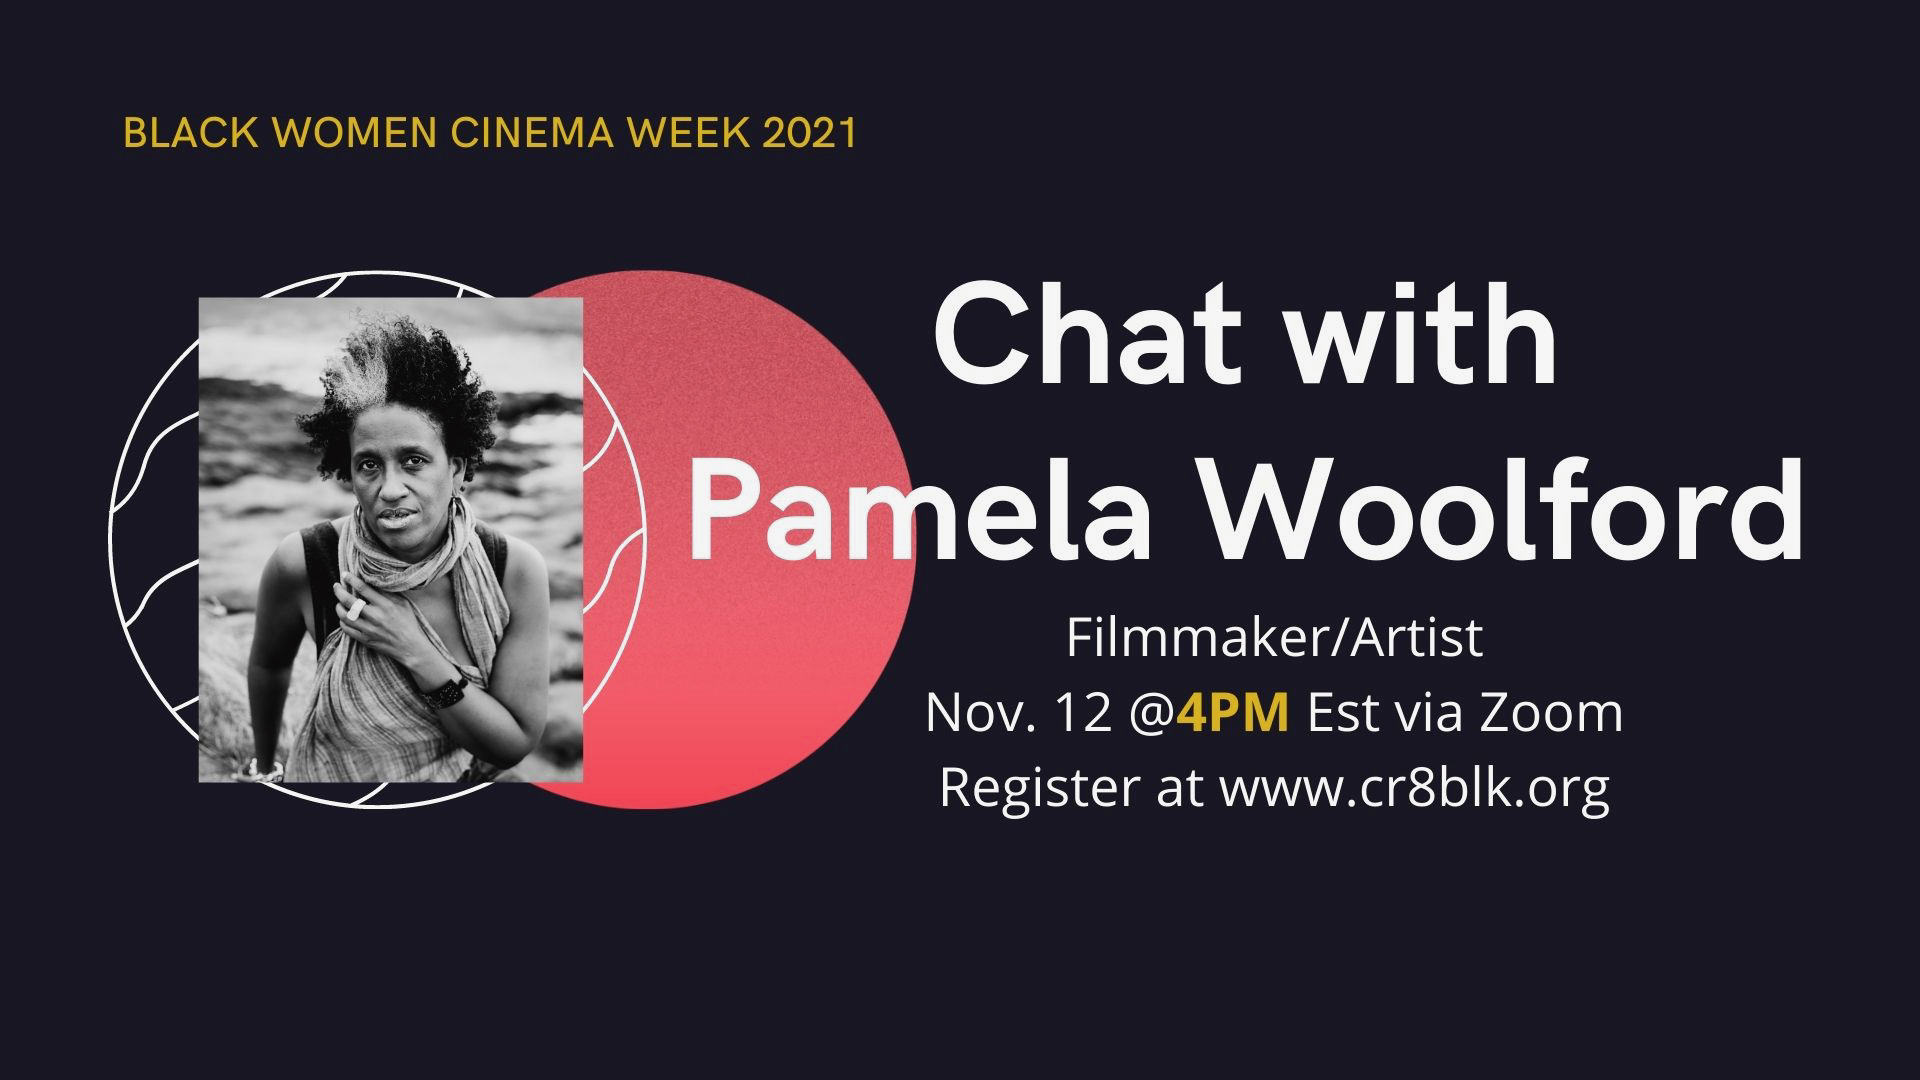 A photograph of Pamela Woolford in a graphic promoting a chat with her at Black Women Cinema Week 2021